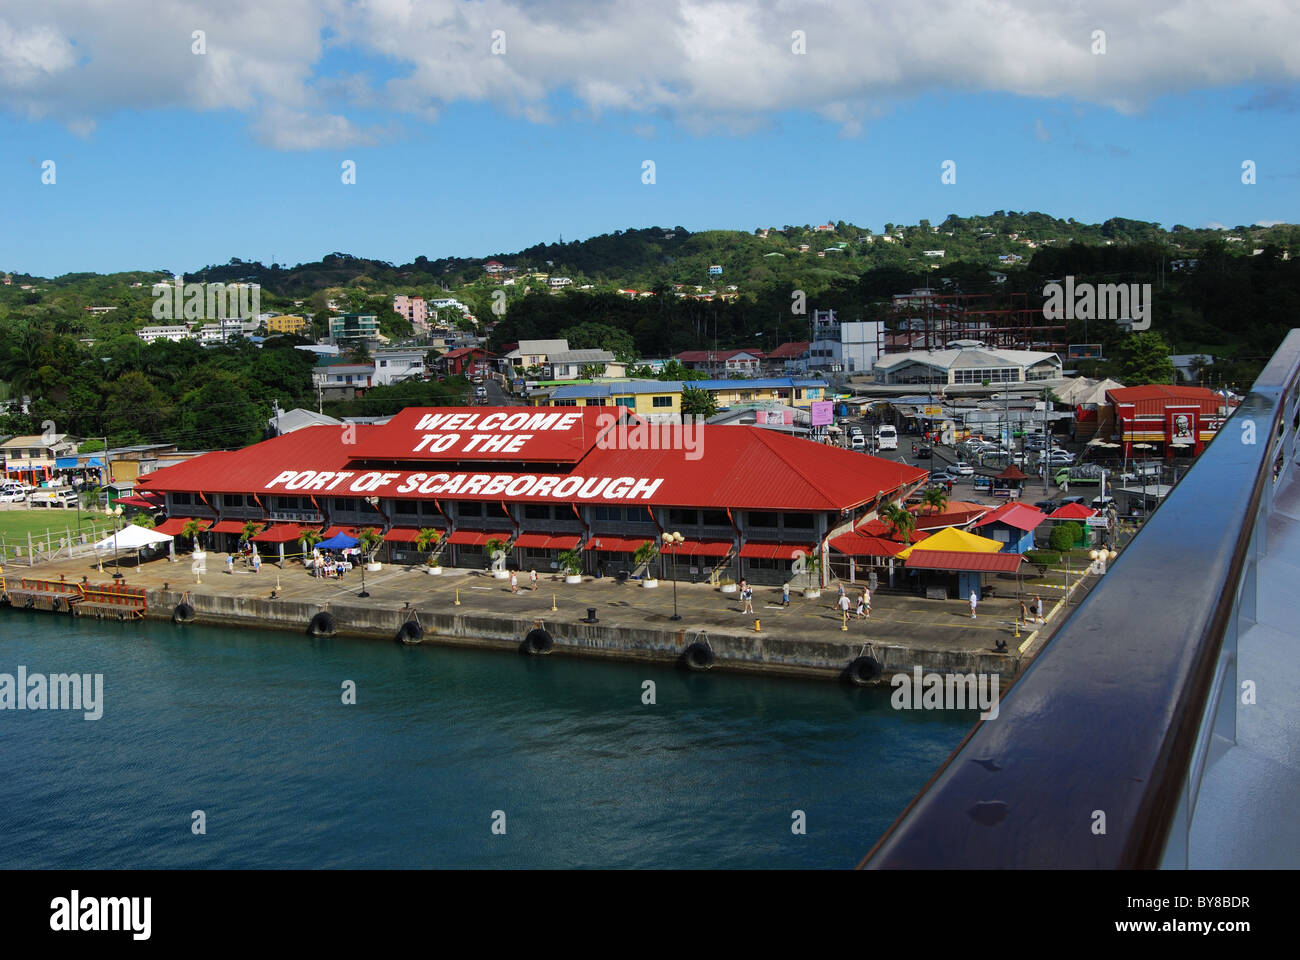 Port of Scarborough harbour building and elevated view of town, Scarborough, Tobago, Trinidad and Tobago, Caribbean. Stock Photo